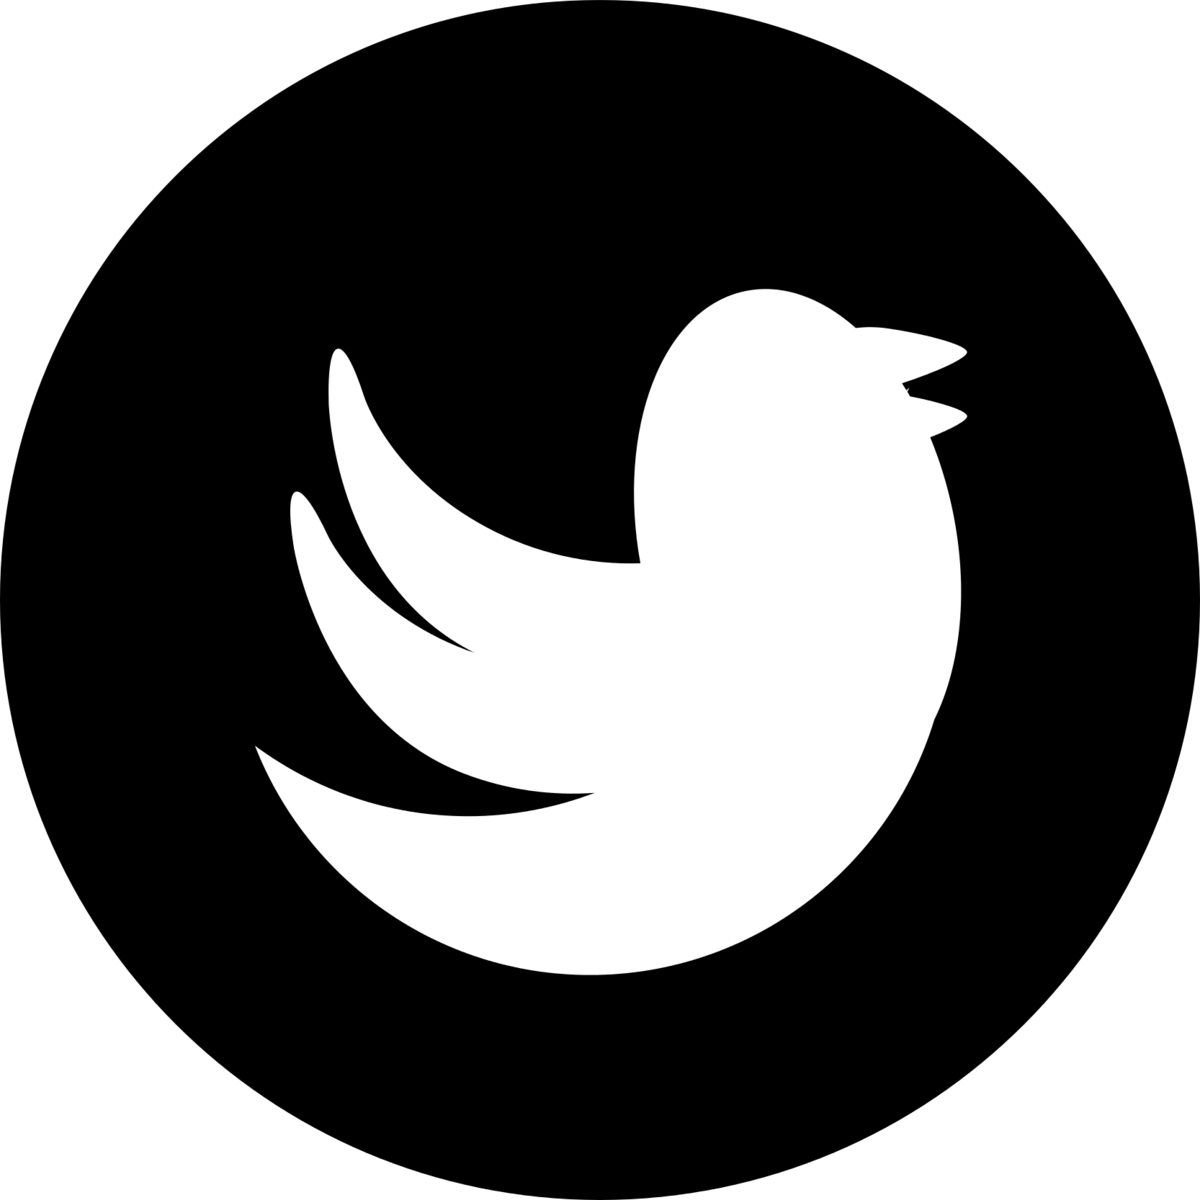 Black and White Twitter Logo - Black And White Twitter Icon Transparent_2372885